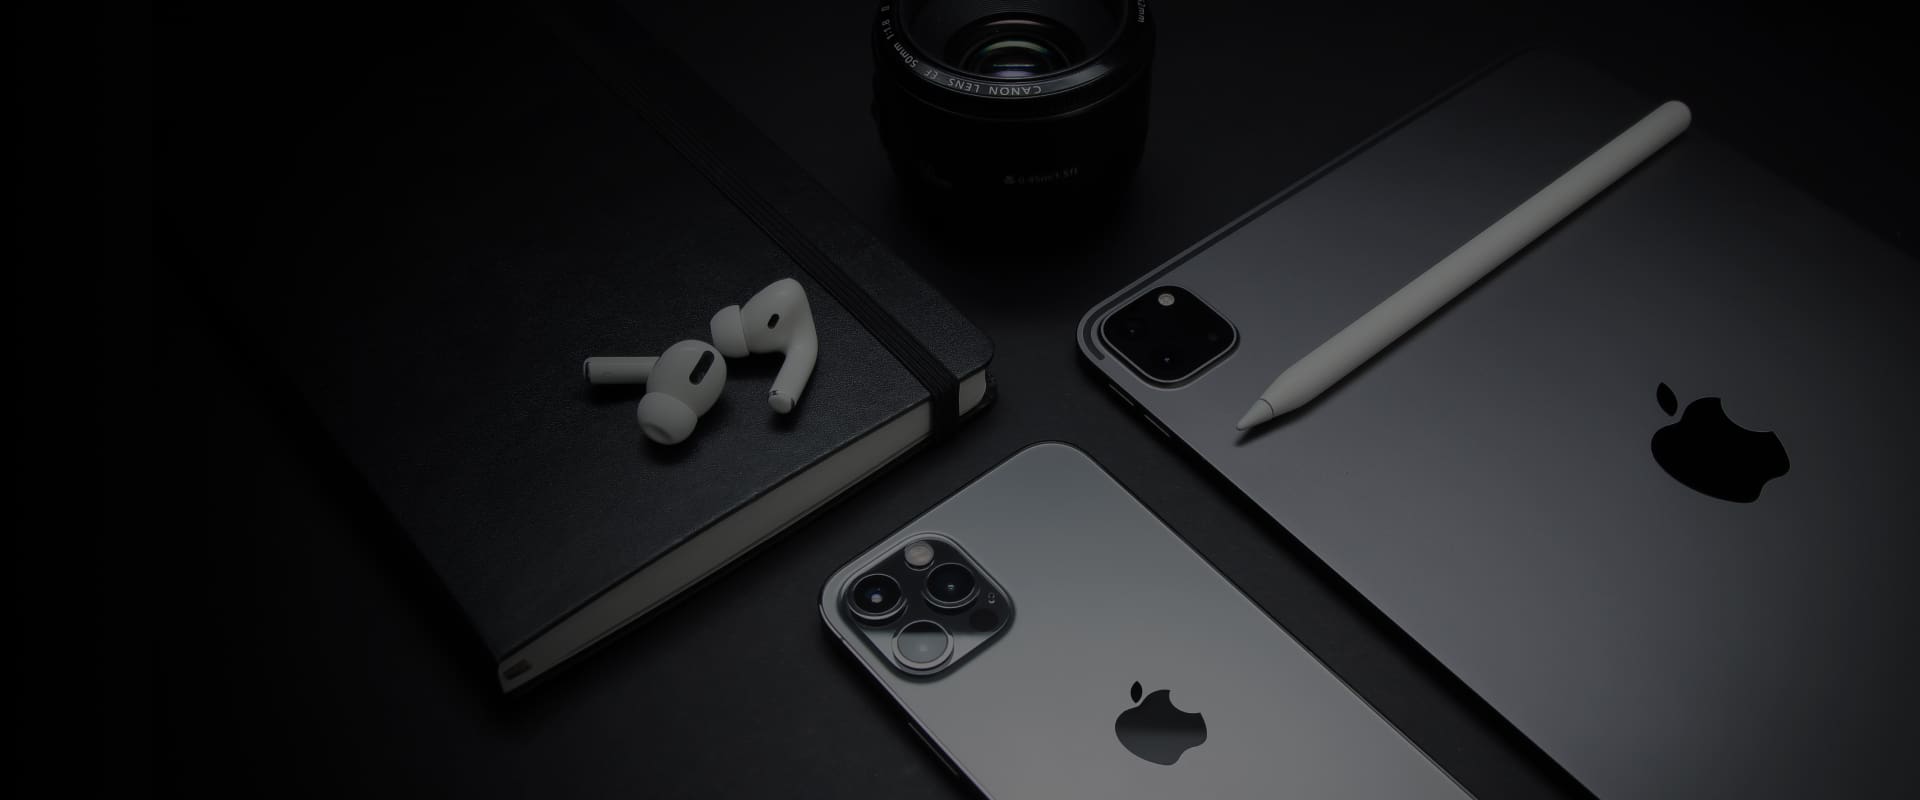 Apple devices lying on a black surface